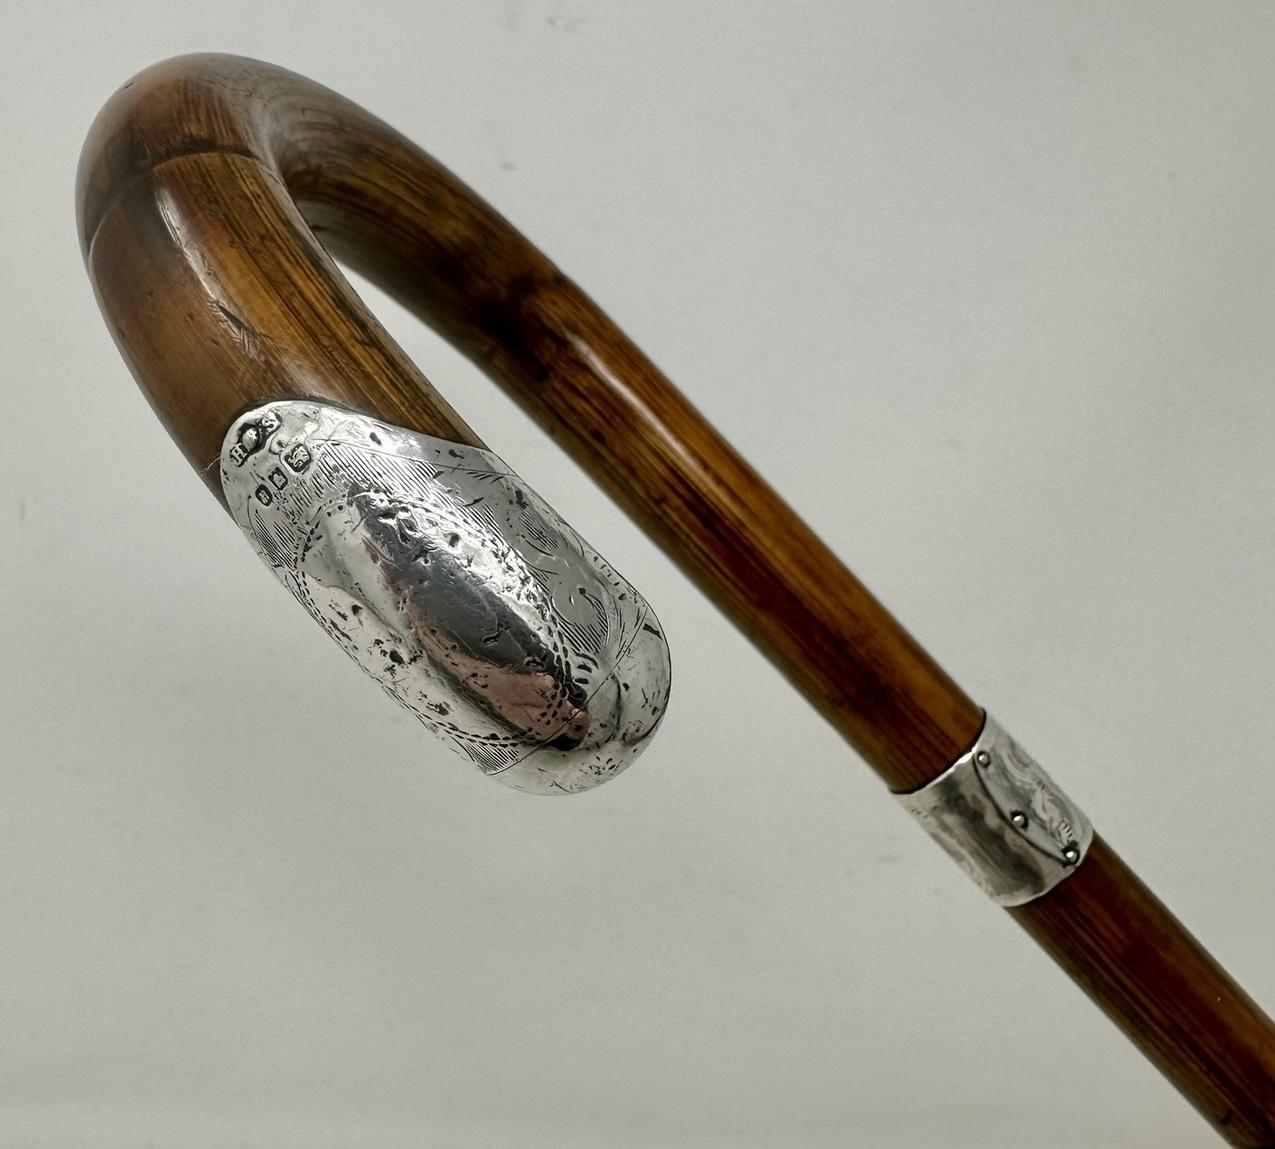 Antique Vintage Lady's Gentleman's Walking Stick Sterling Silver Crook Handle In Good Condition For Sale In Dublin, Ireland